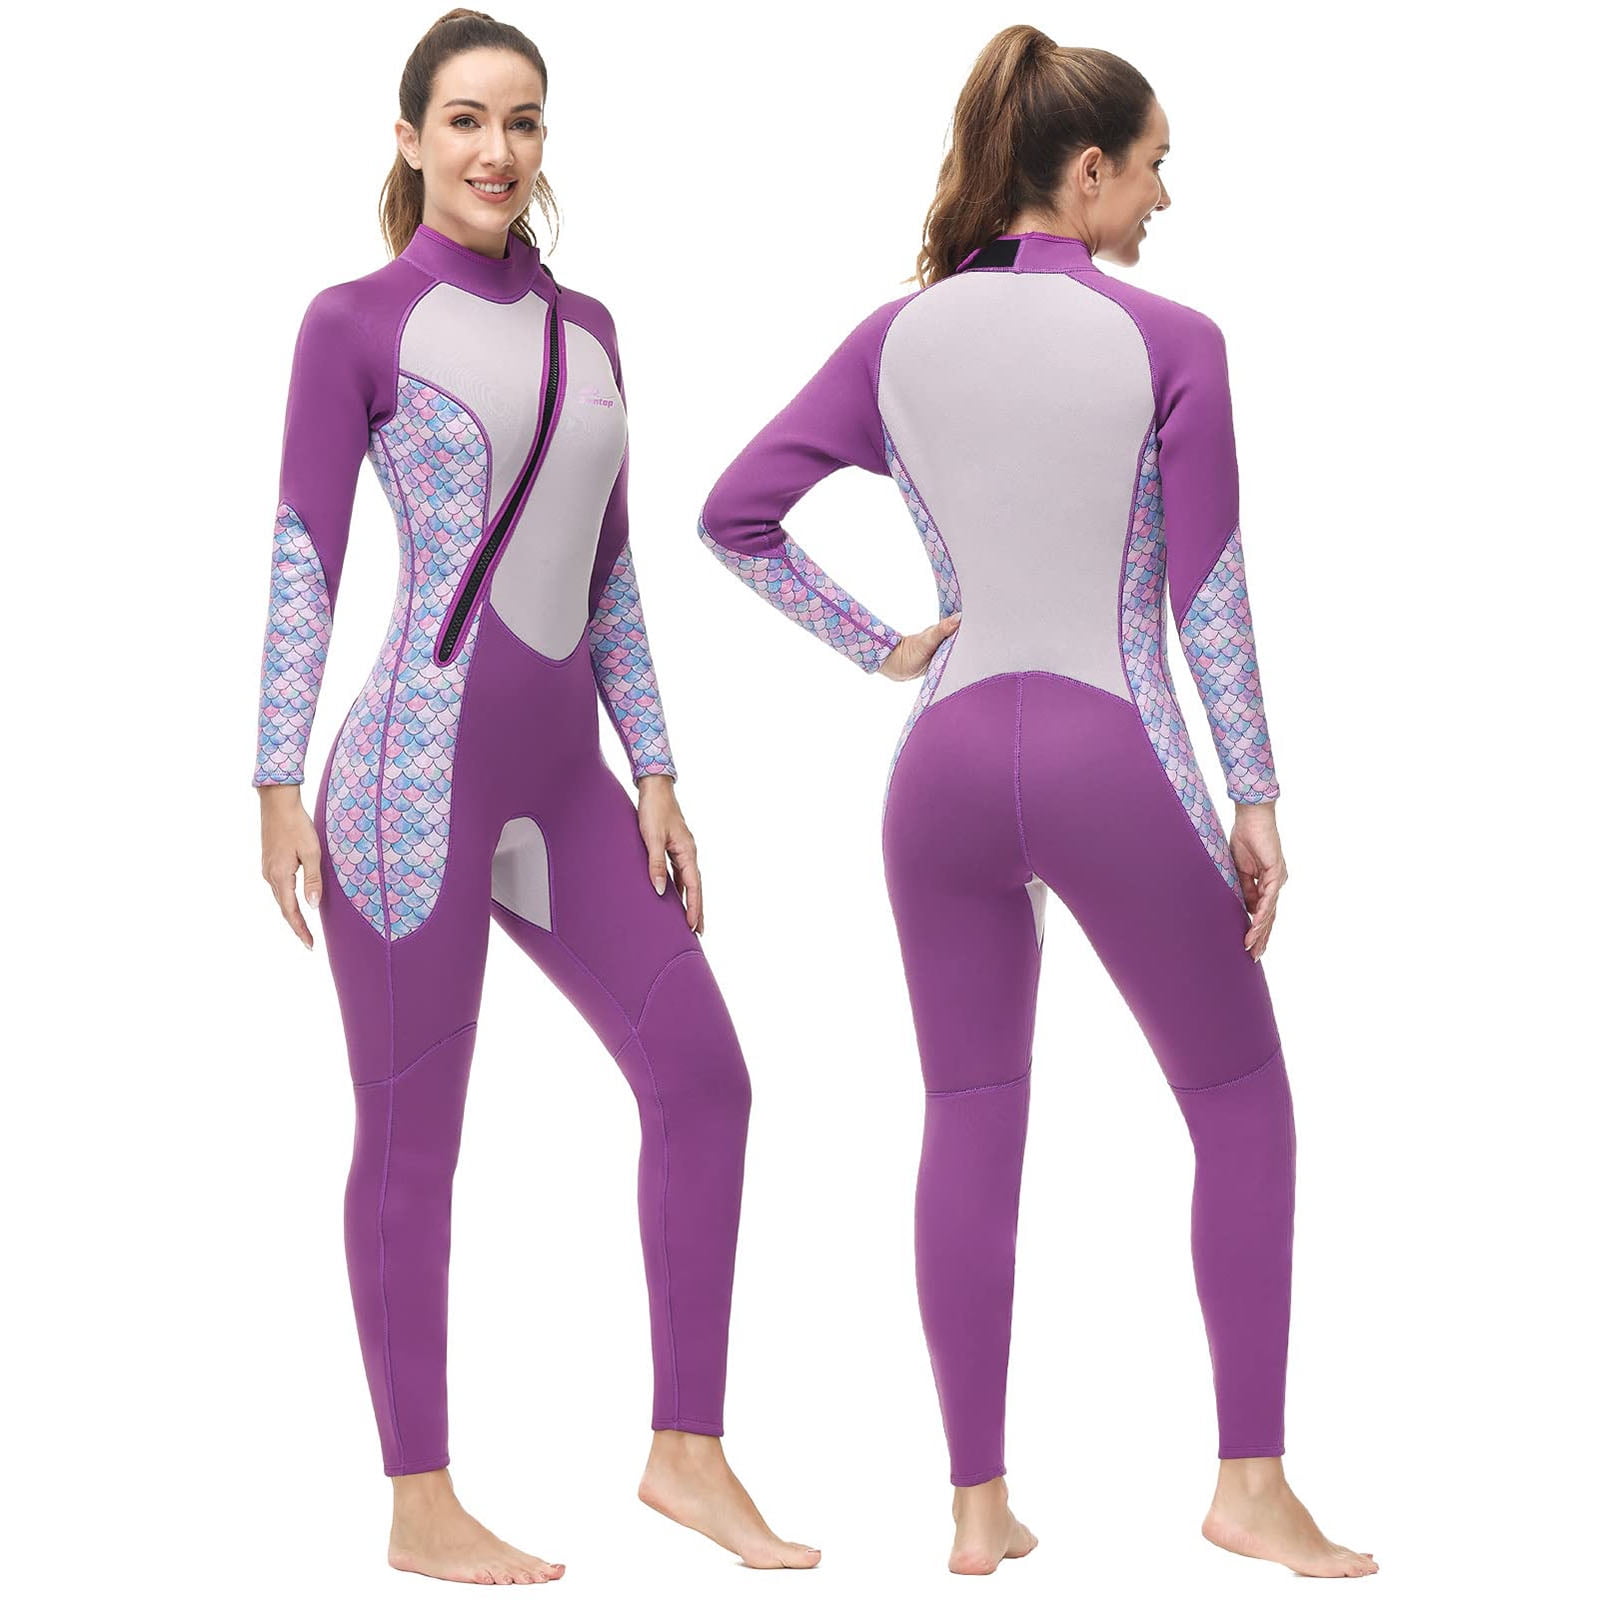 Buy Long Sleeve Navy/Pink 3mm Neoprene Wetsuit (1-16yrs) from Next USA